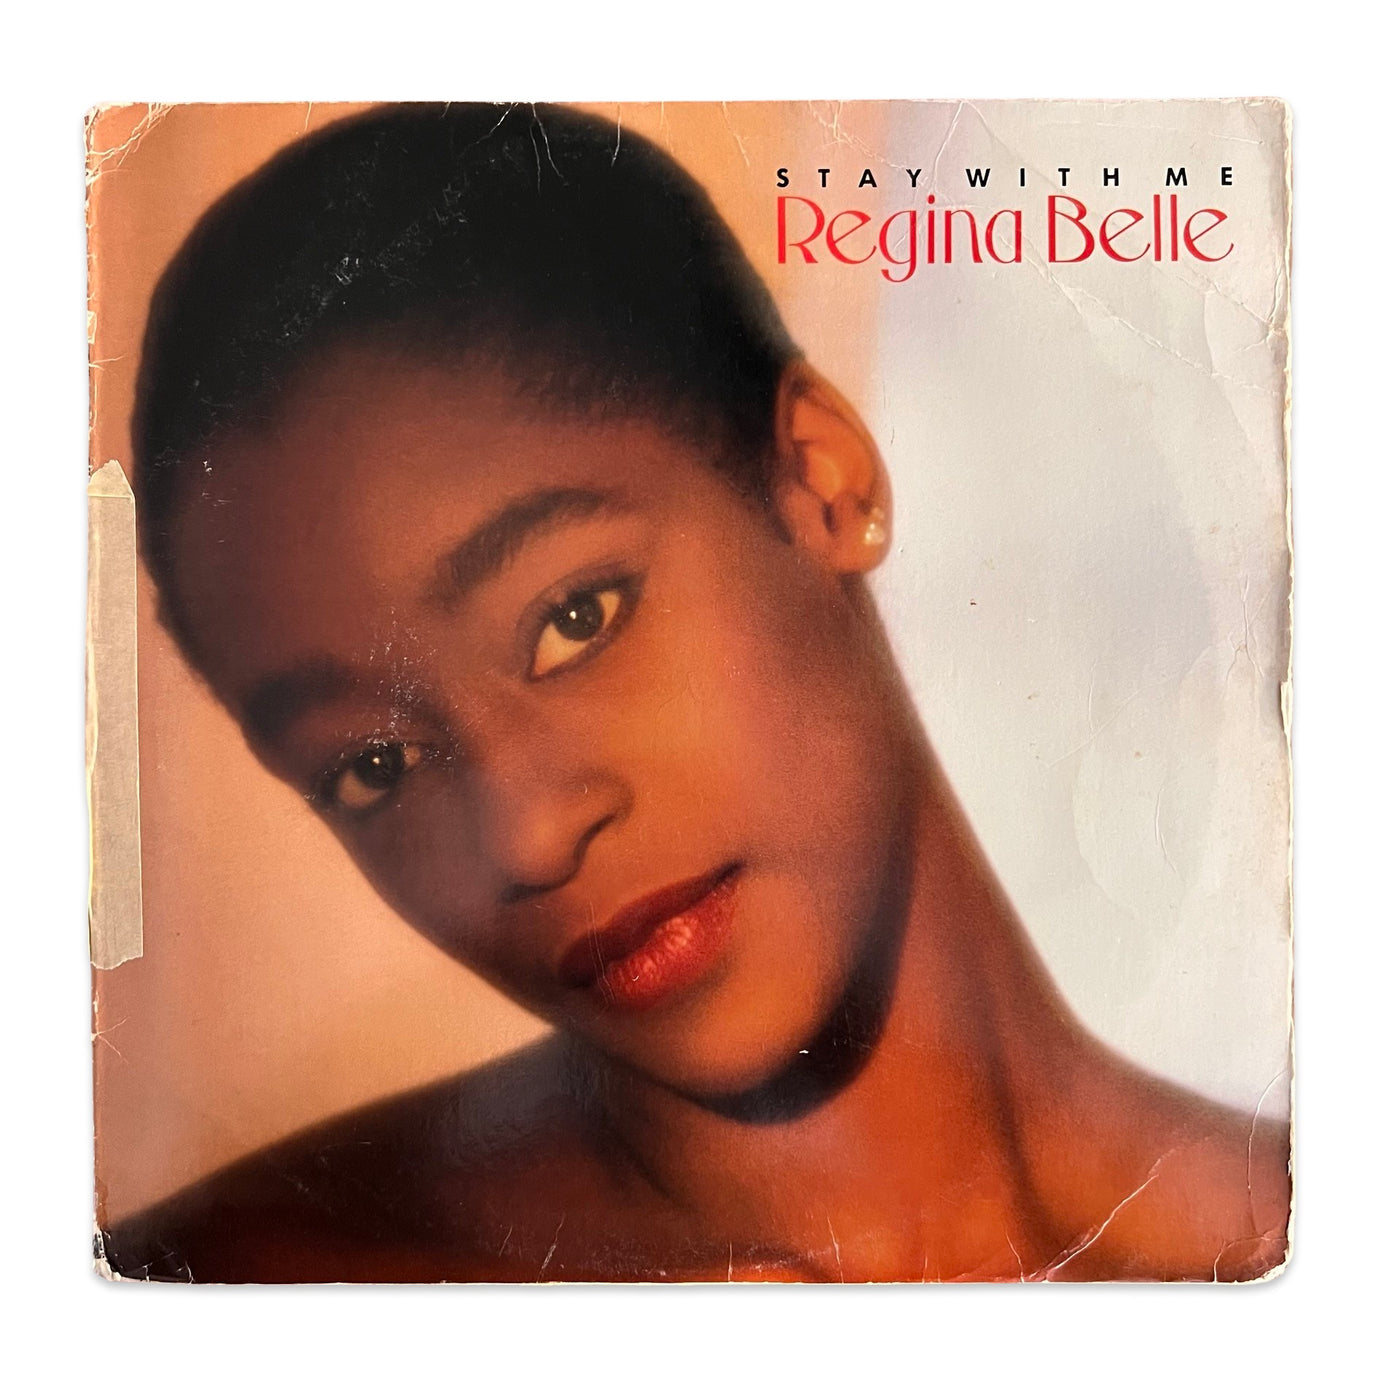 Regina Belle – Stay With Me